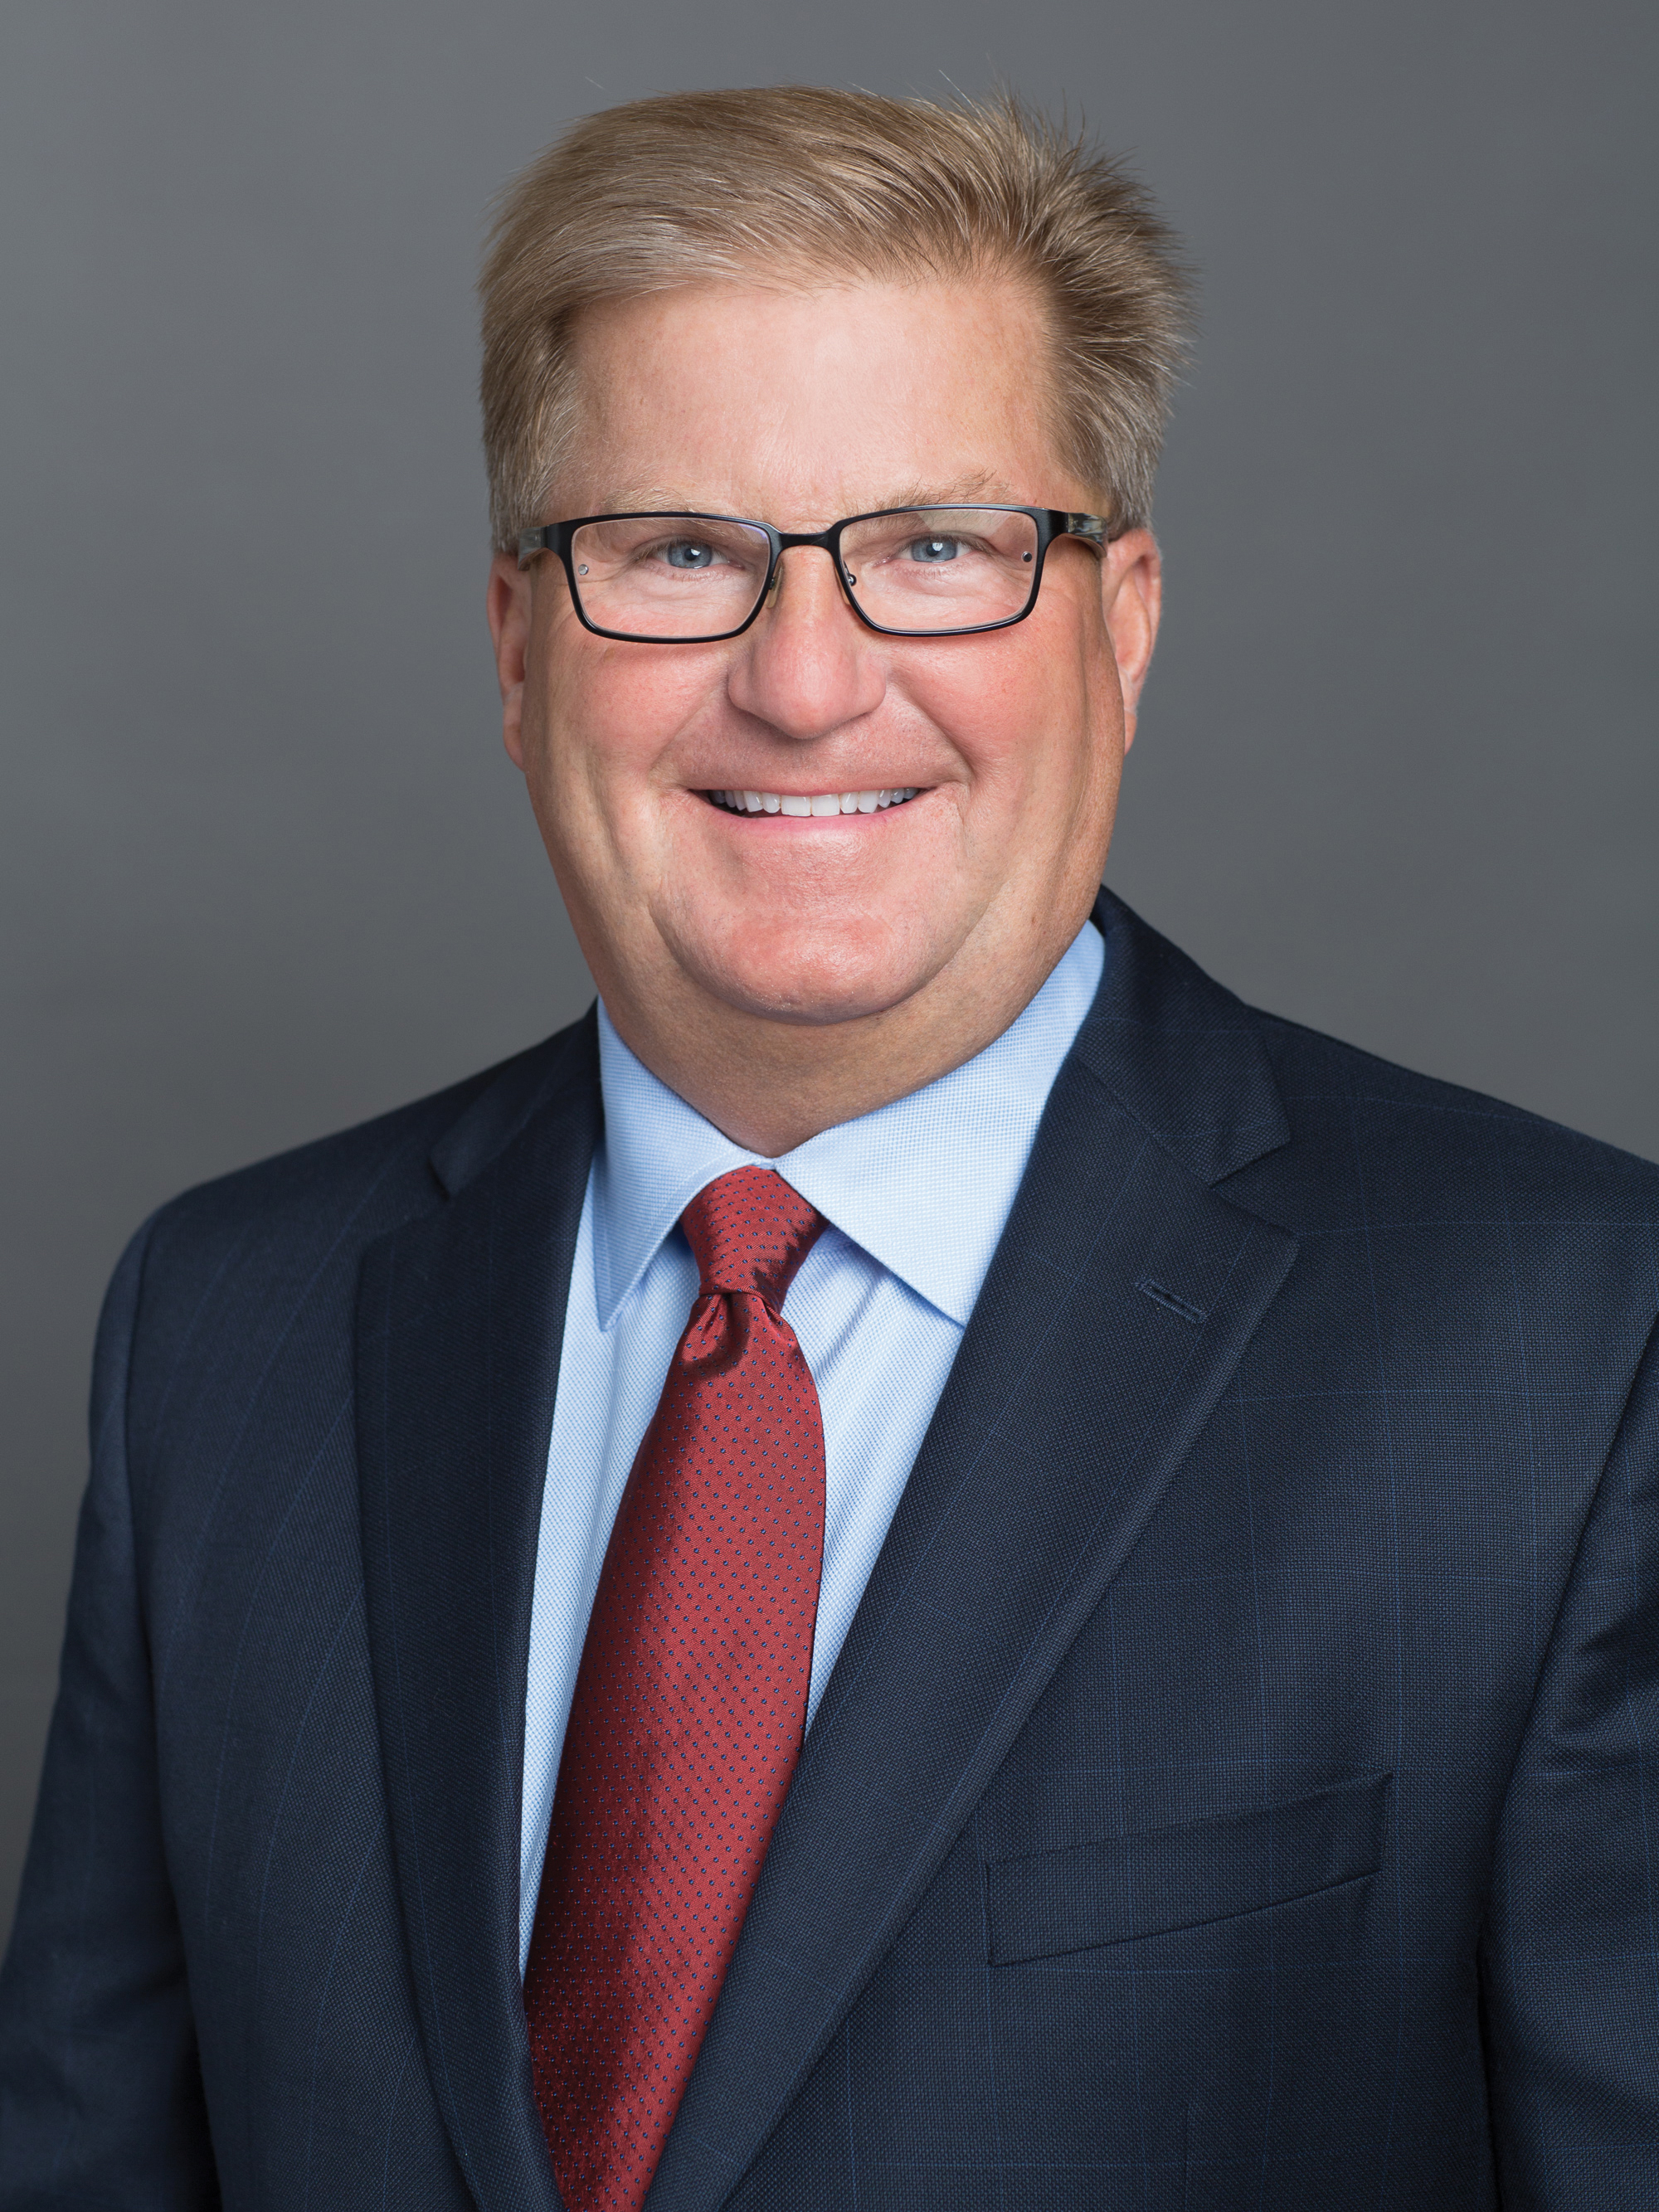 Independent Bank Corporation Announces Appointment of Stephen L. Gulis, Jr. as Chairperson to Its Board of Directors